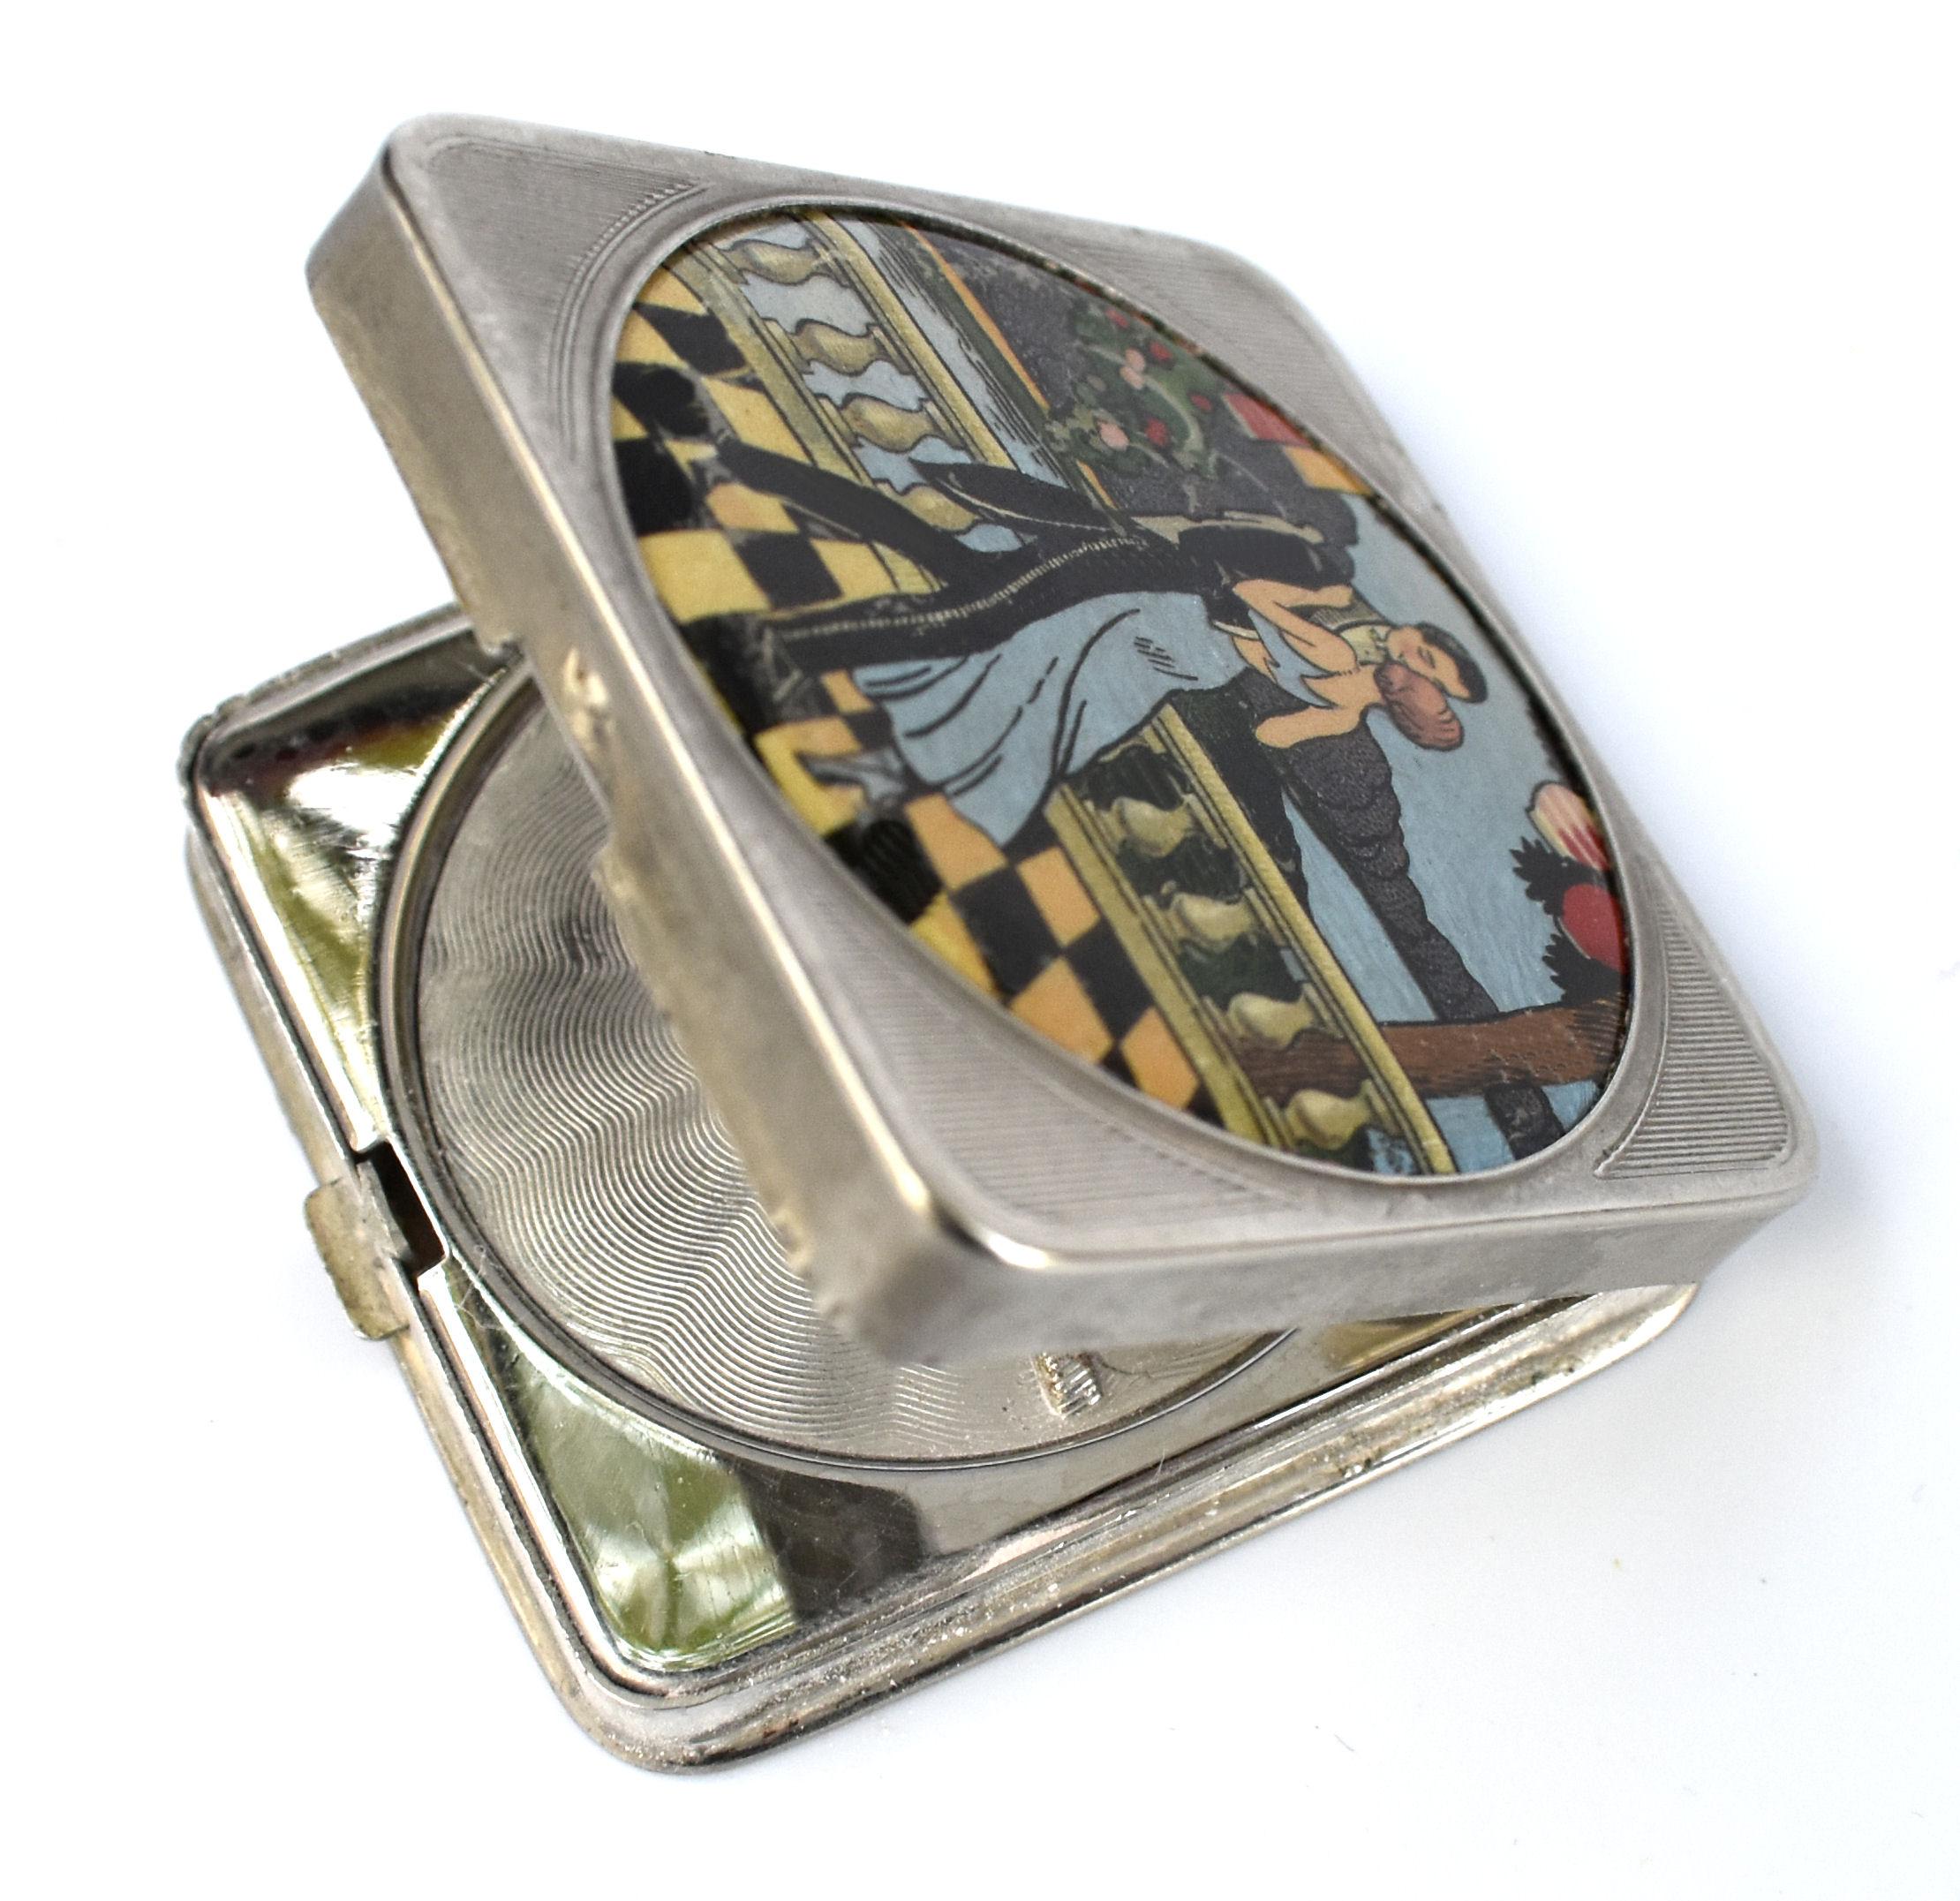 20th Century Art Deco Foiled Backed Stratnoid 1930's Ladies Powder Compact